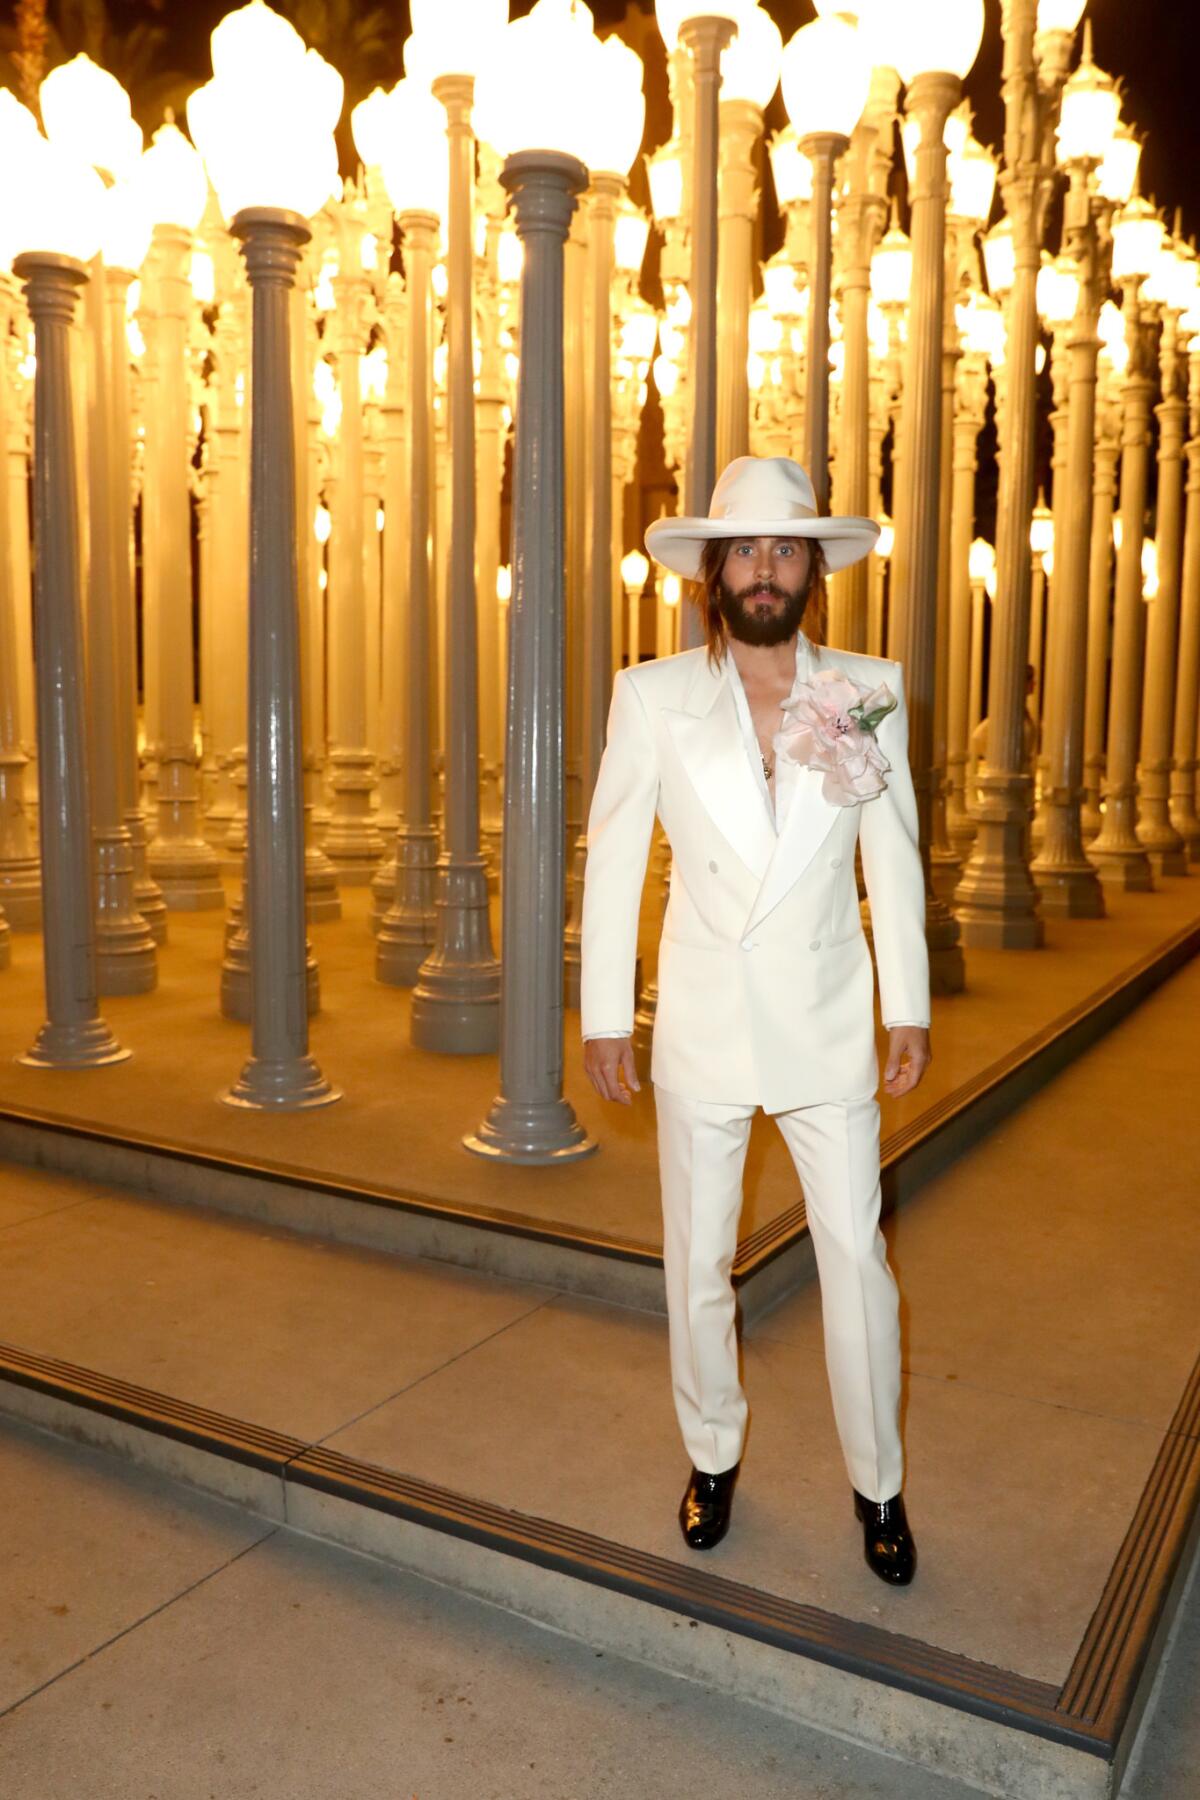 Actor Jared Leto attends the 2018 LACMA Art + Film Gala in Los Angeles.